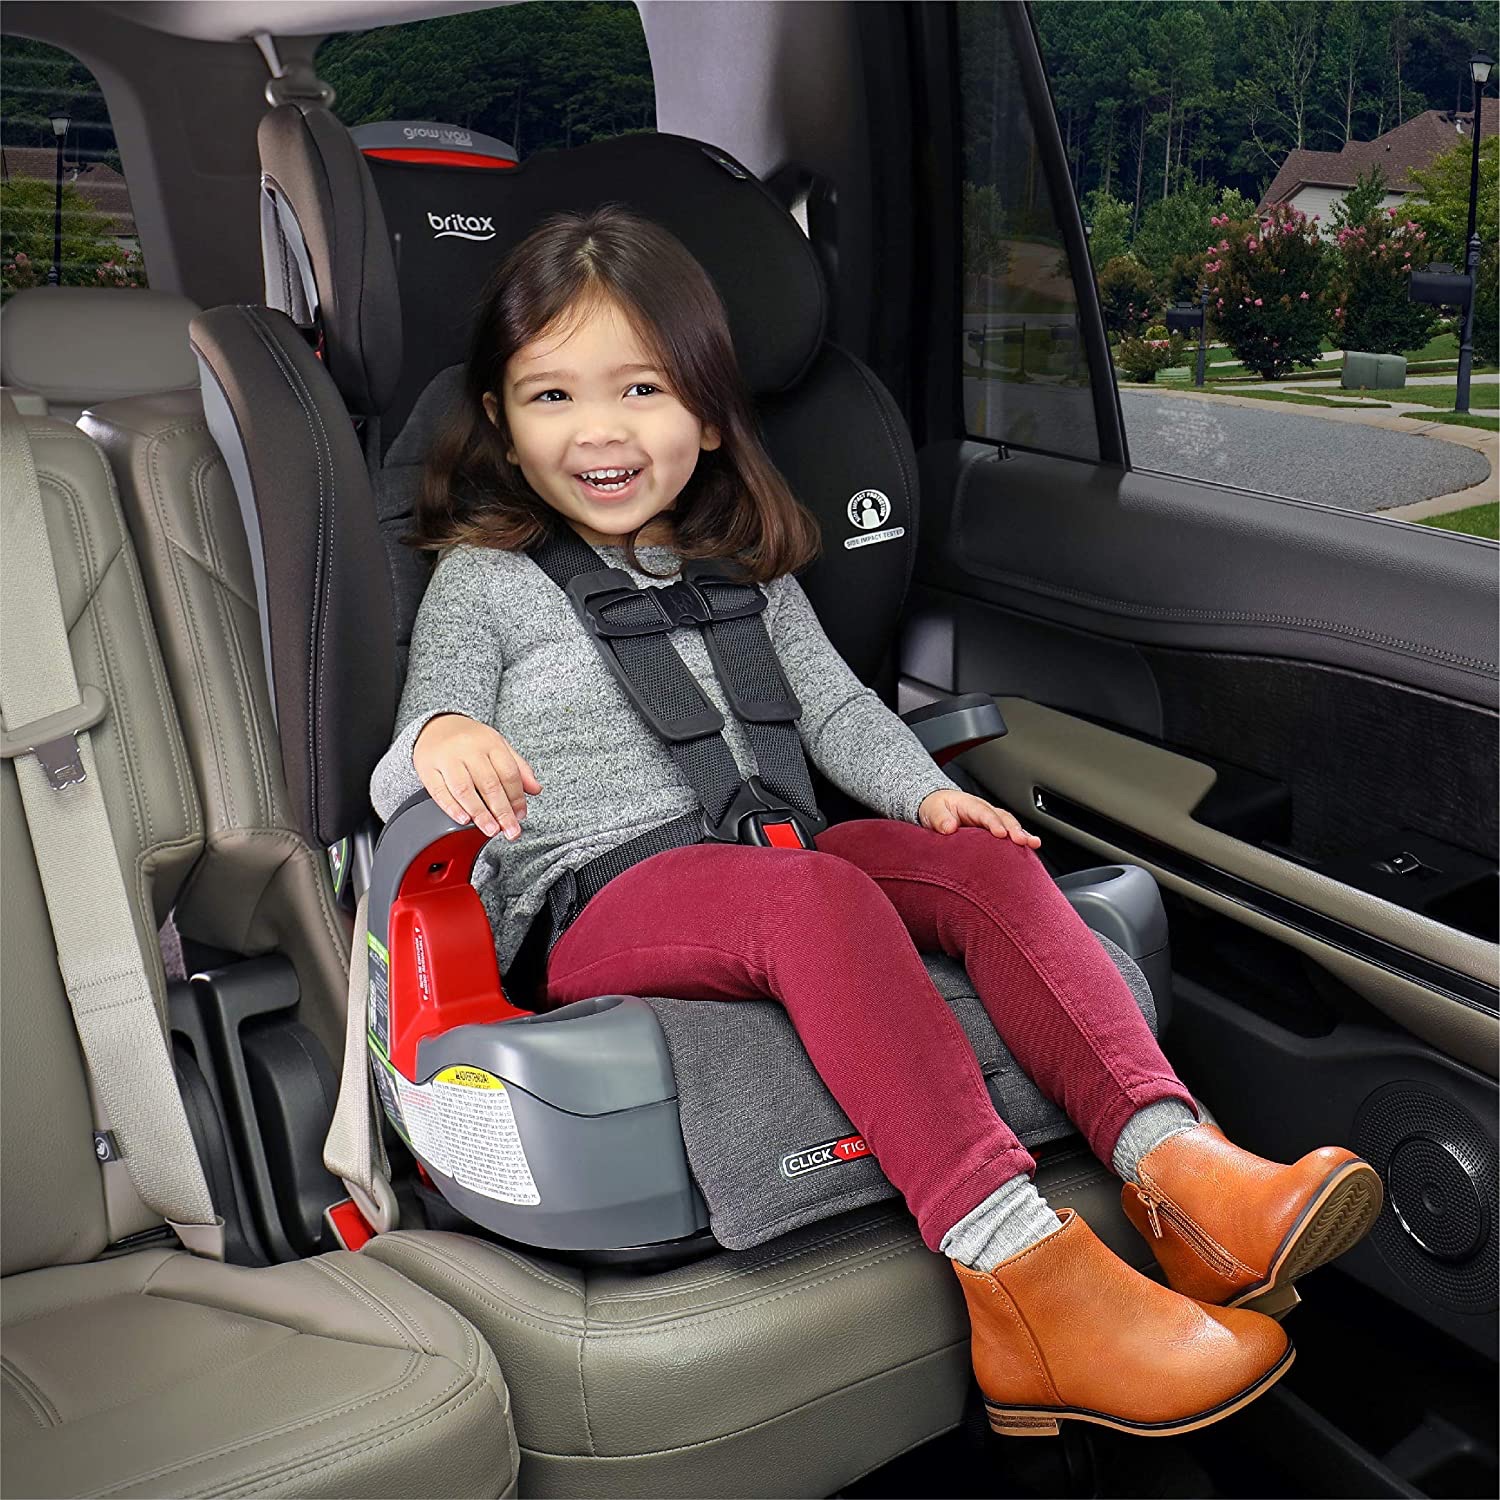 Amazon.com : Britax Grow with You ClickTight Harness-2-Booster 安全座椅 | 2 Layer Impact Protection - 25 to 120 Pounds, Stayclean Fabric with Nanotex Technology [New Version of Frontier] : Baby